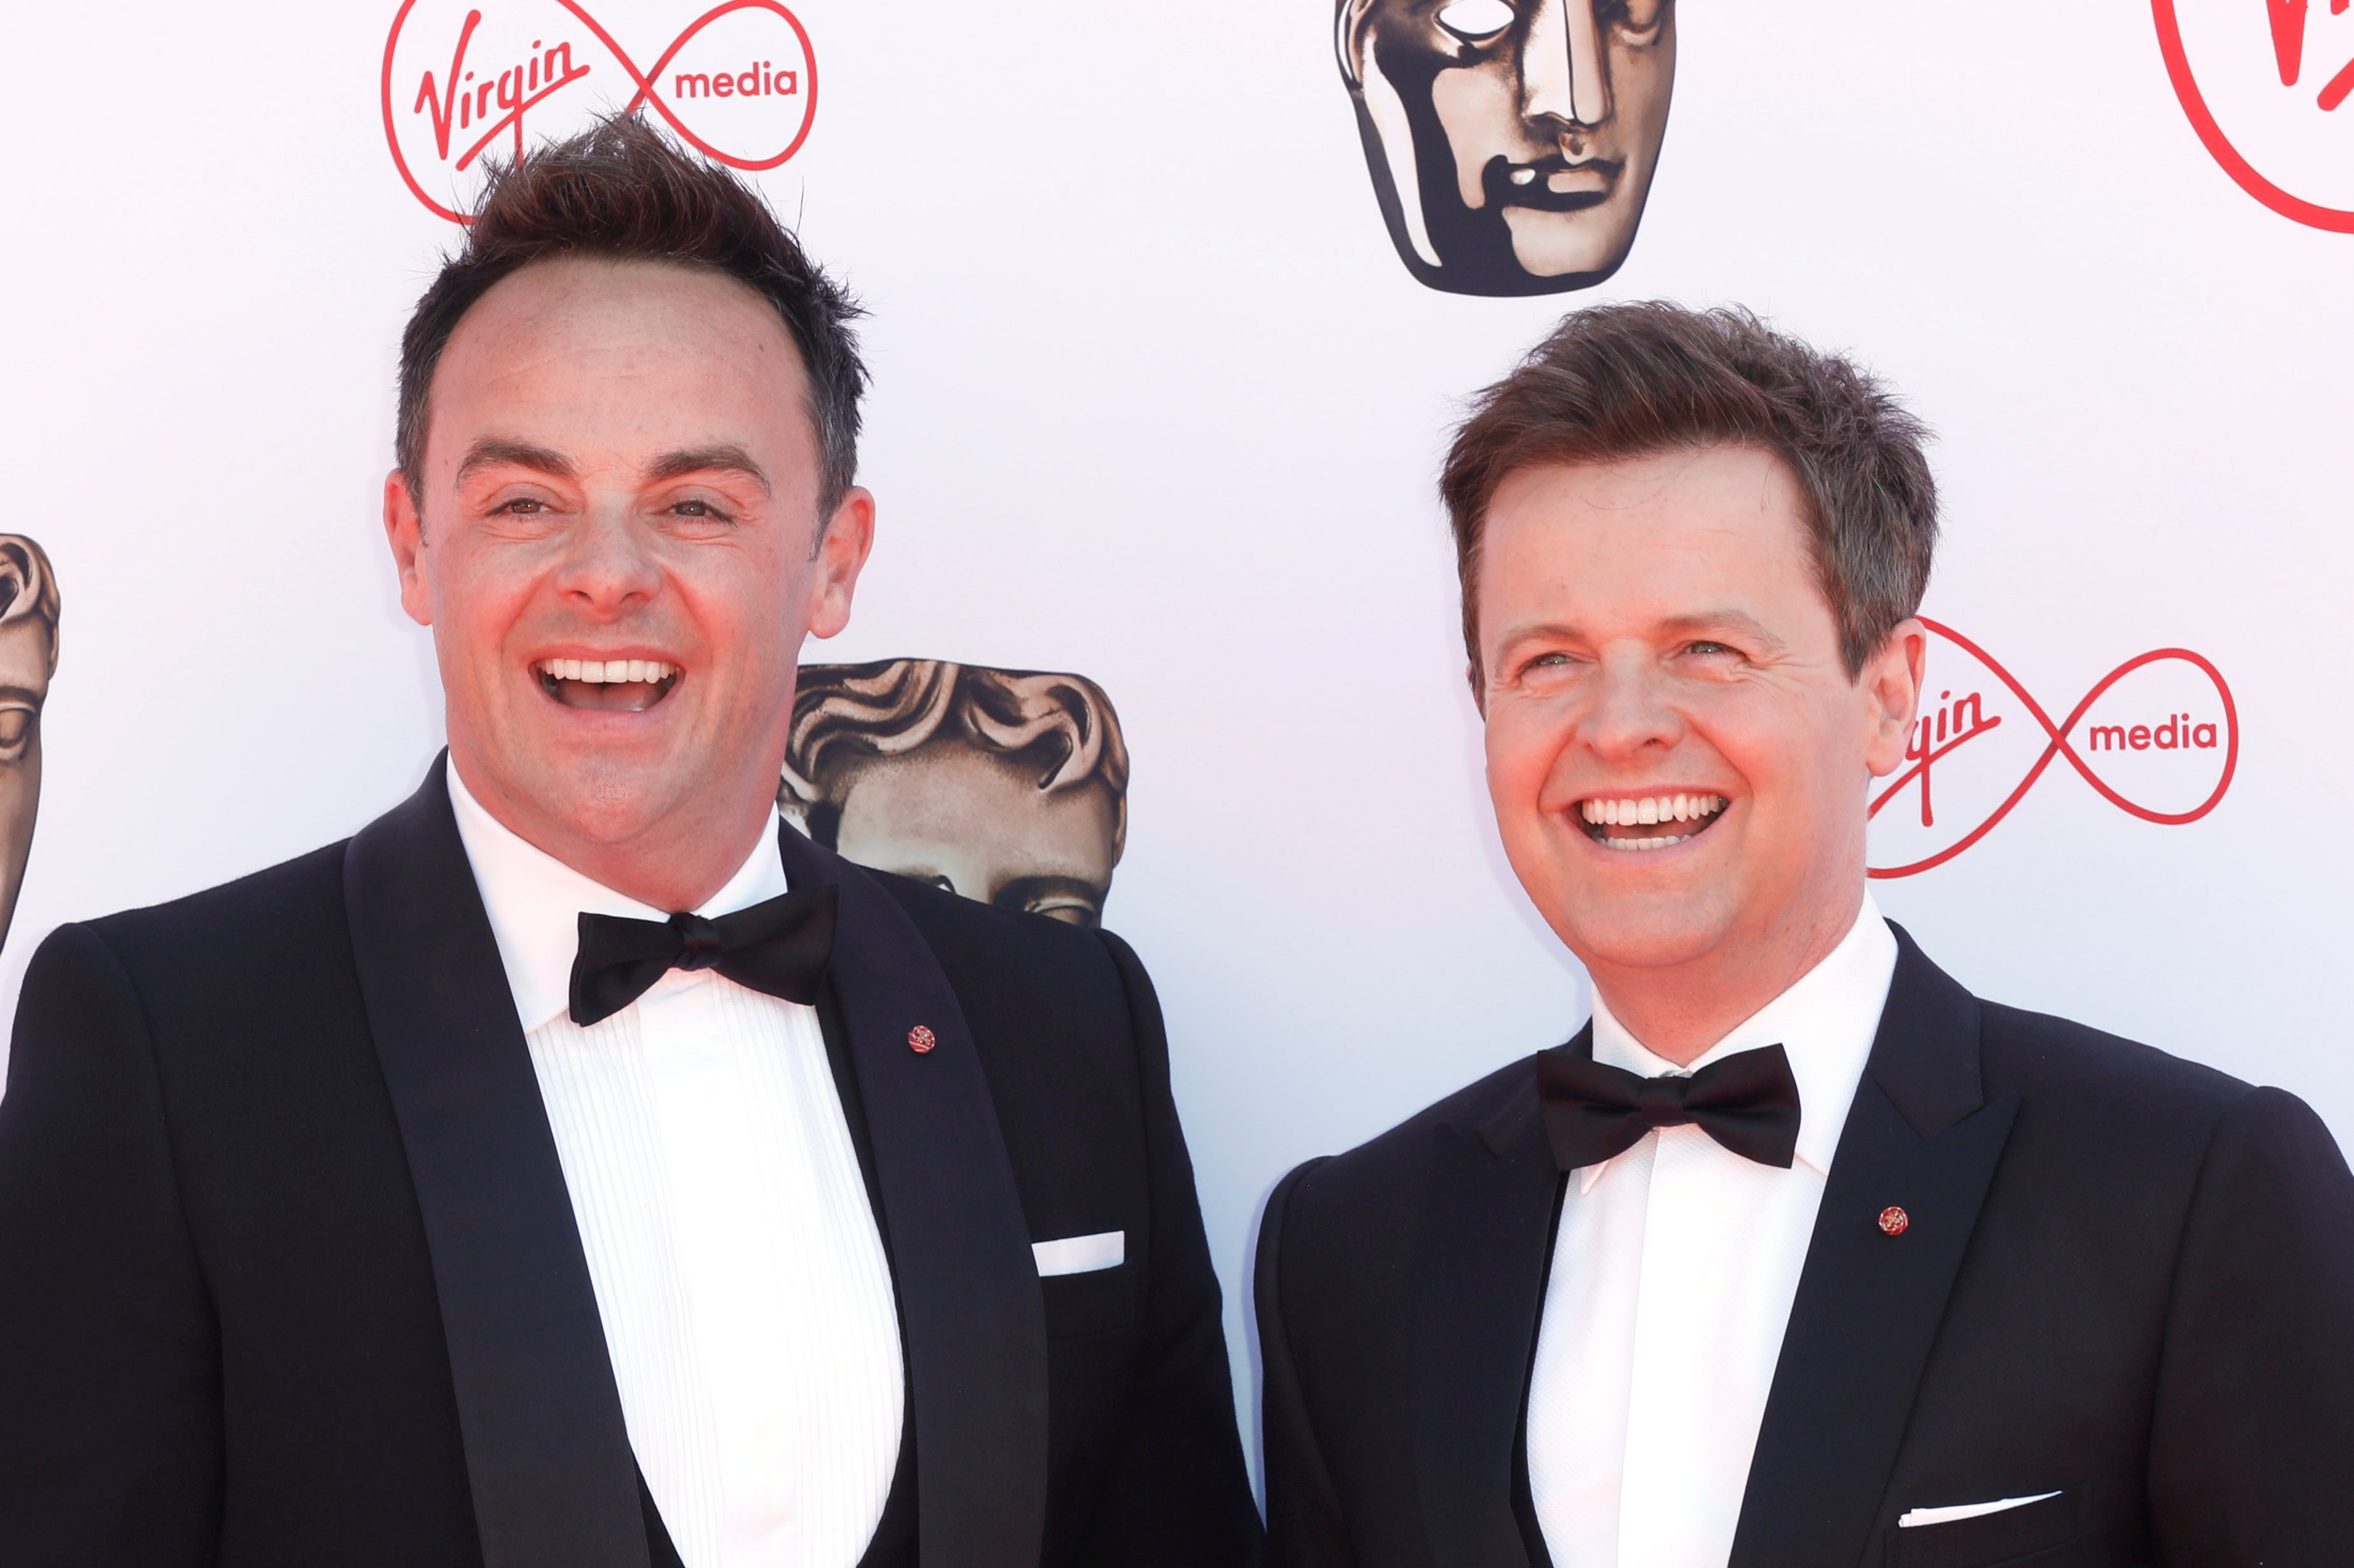 Ant and Dec have shared more about why they’re bringing ‘Saturday Night Takeaway' to a close